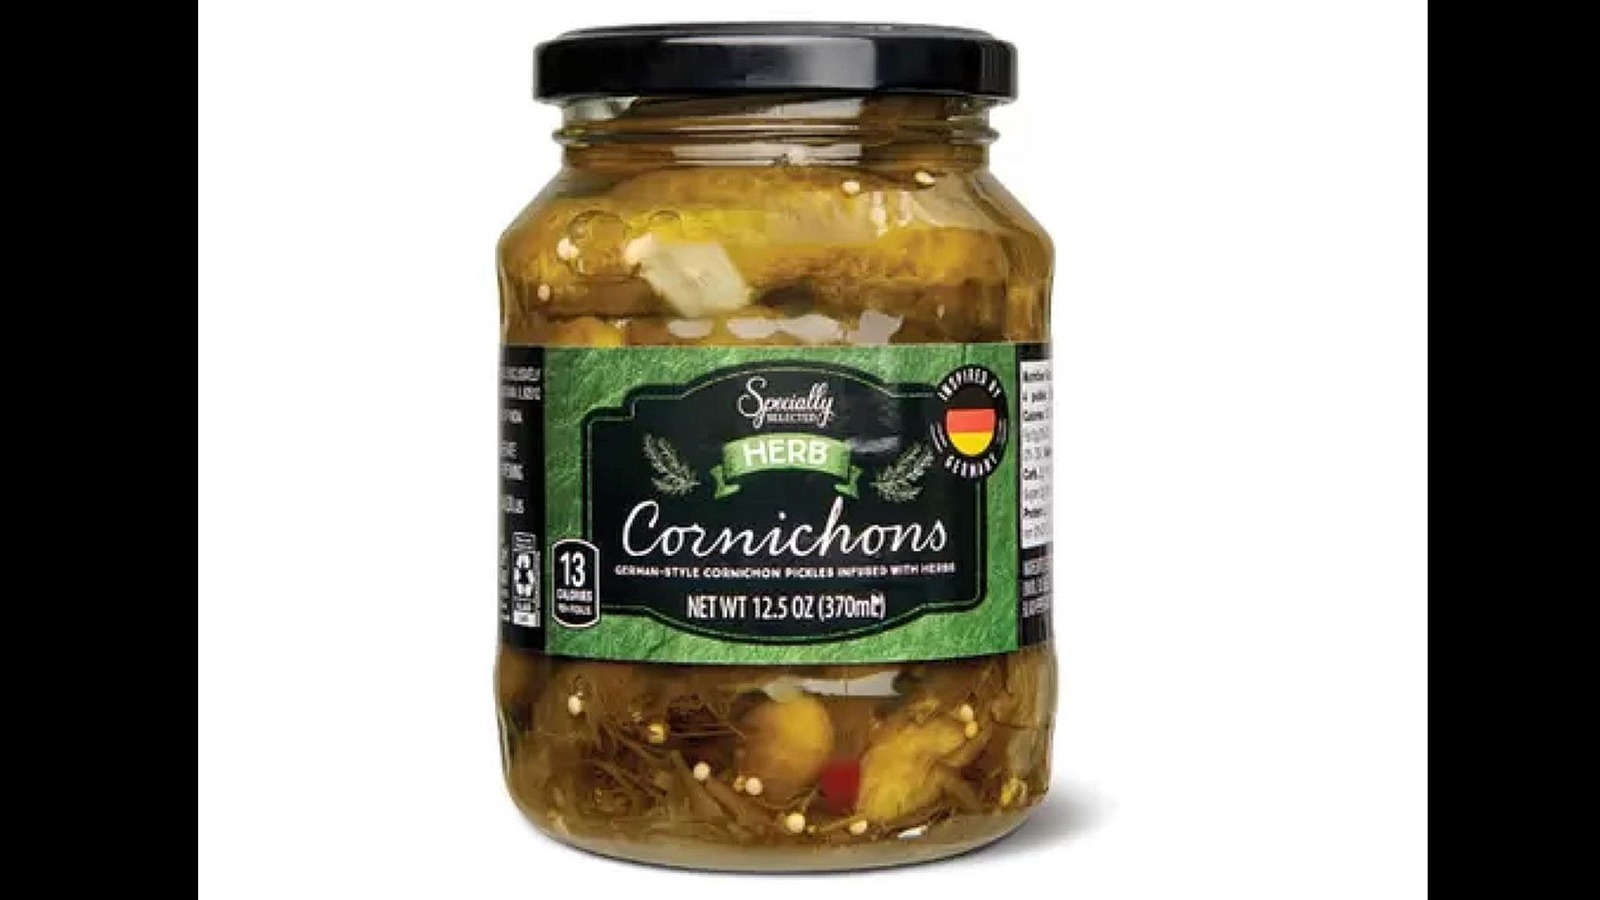 What Is A Cornichon And How Does It Taste?